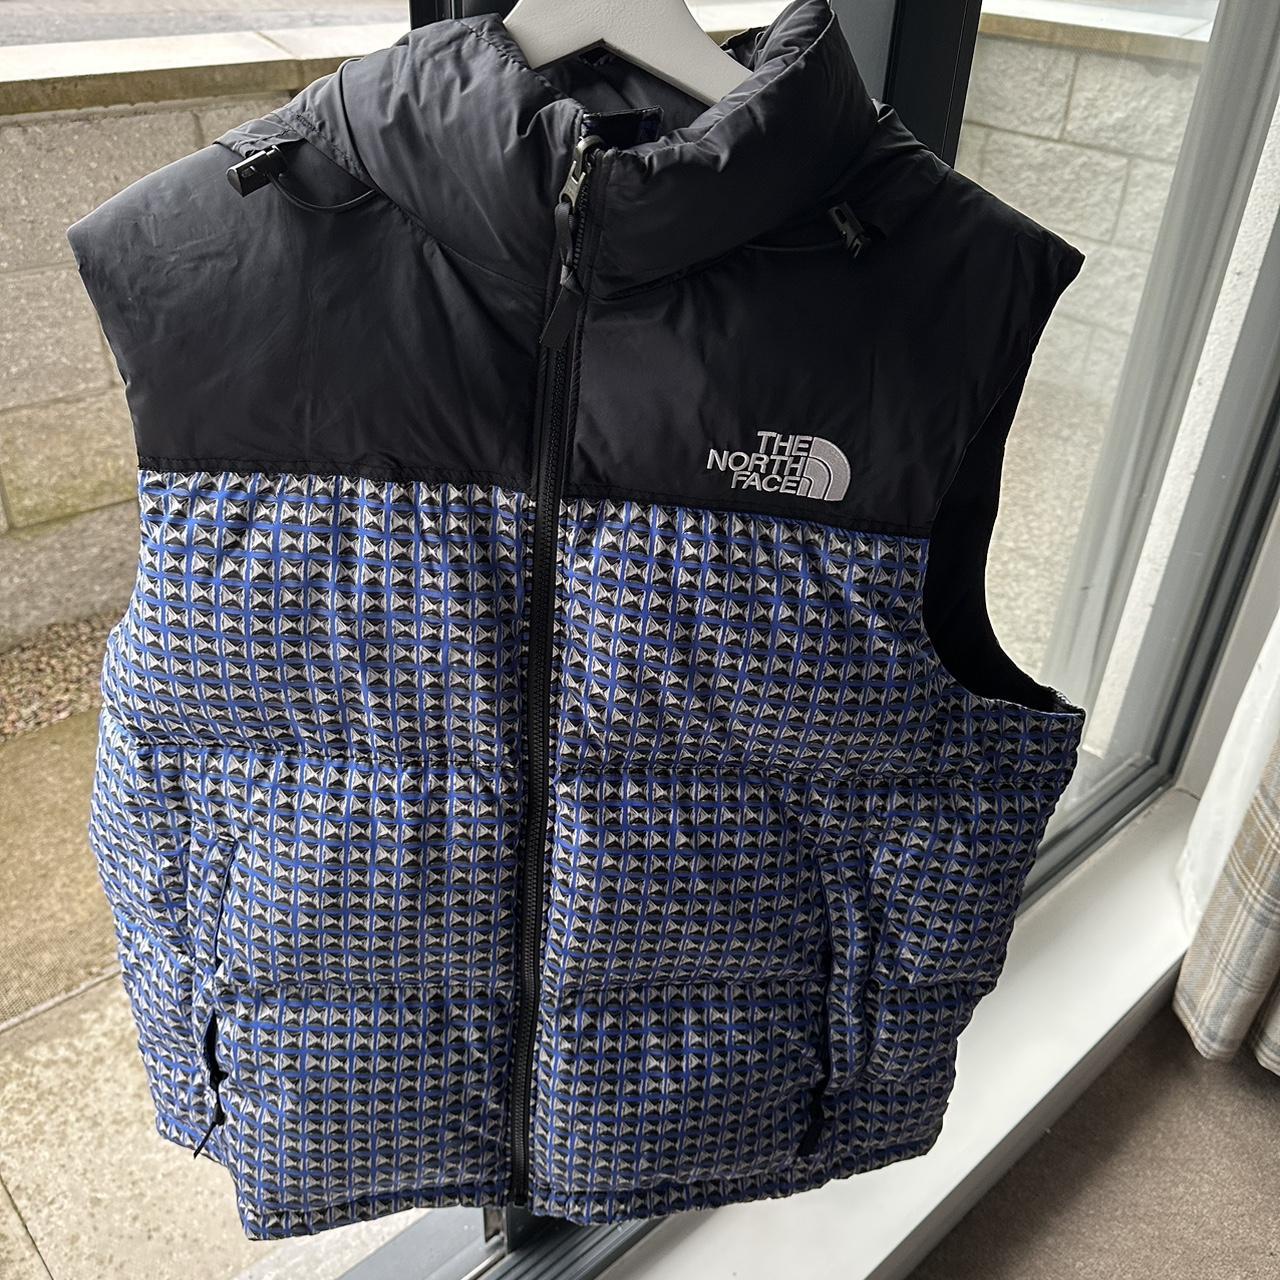 Supreme x The north face gilet. Worn a handful of... - Depop